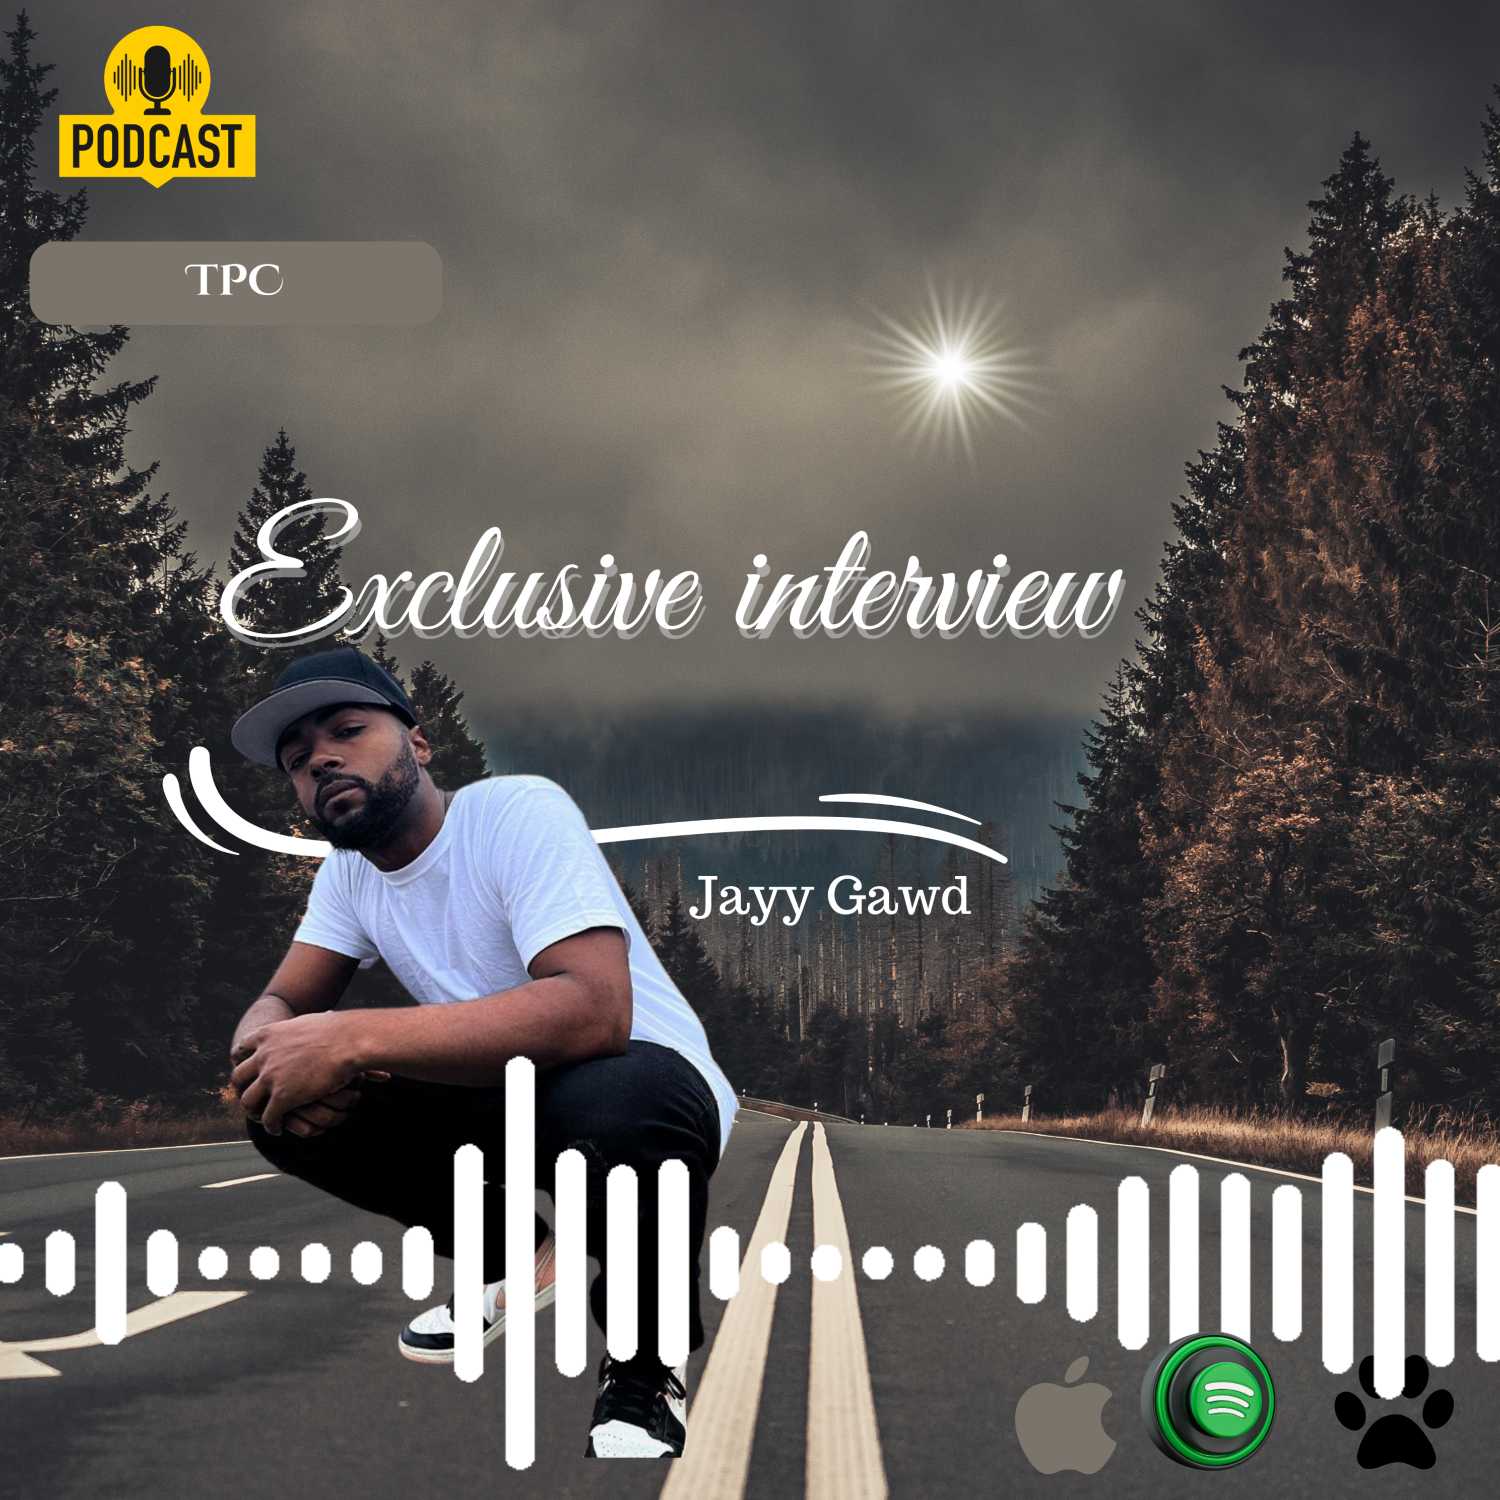 TPC EXLUSIVE INTERVIEW WITH JAYY GAWD SE 4 EP 9